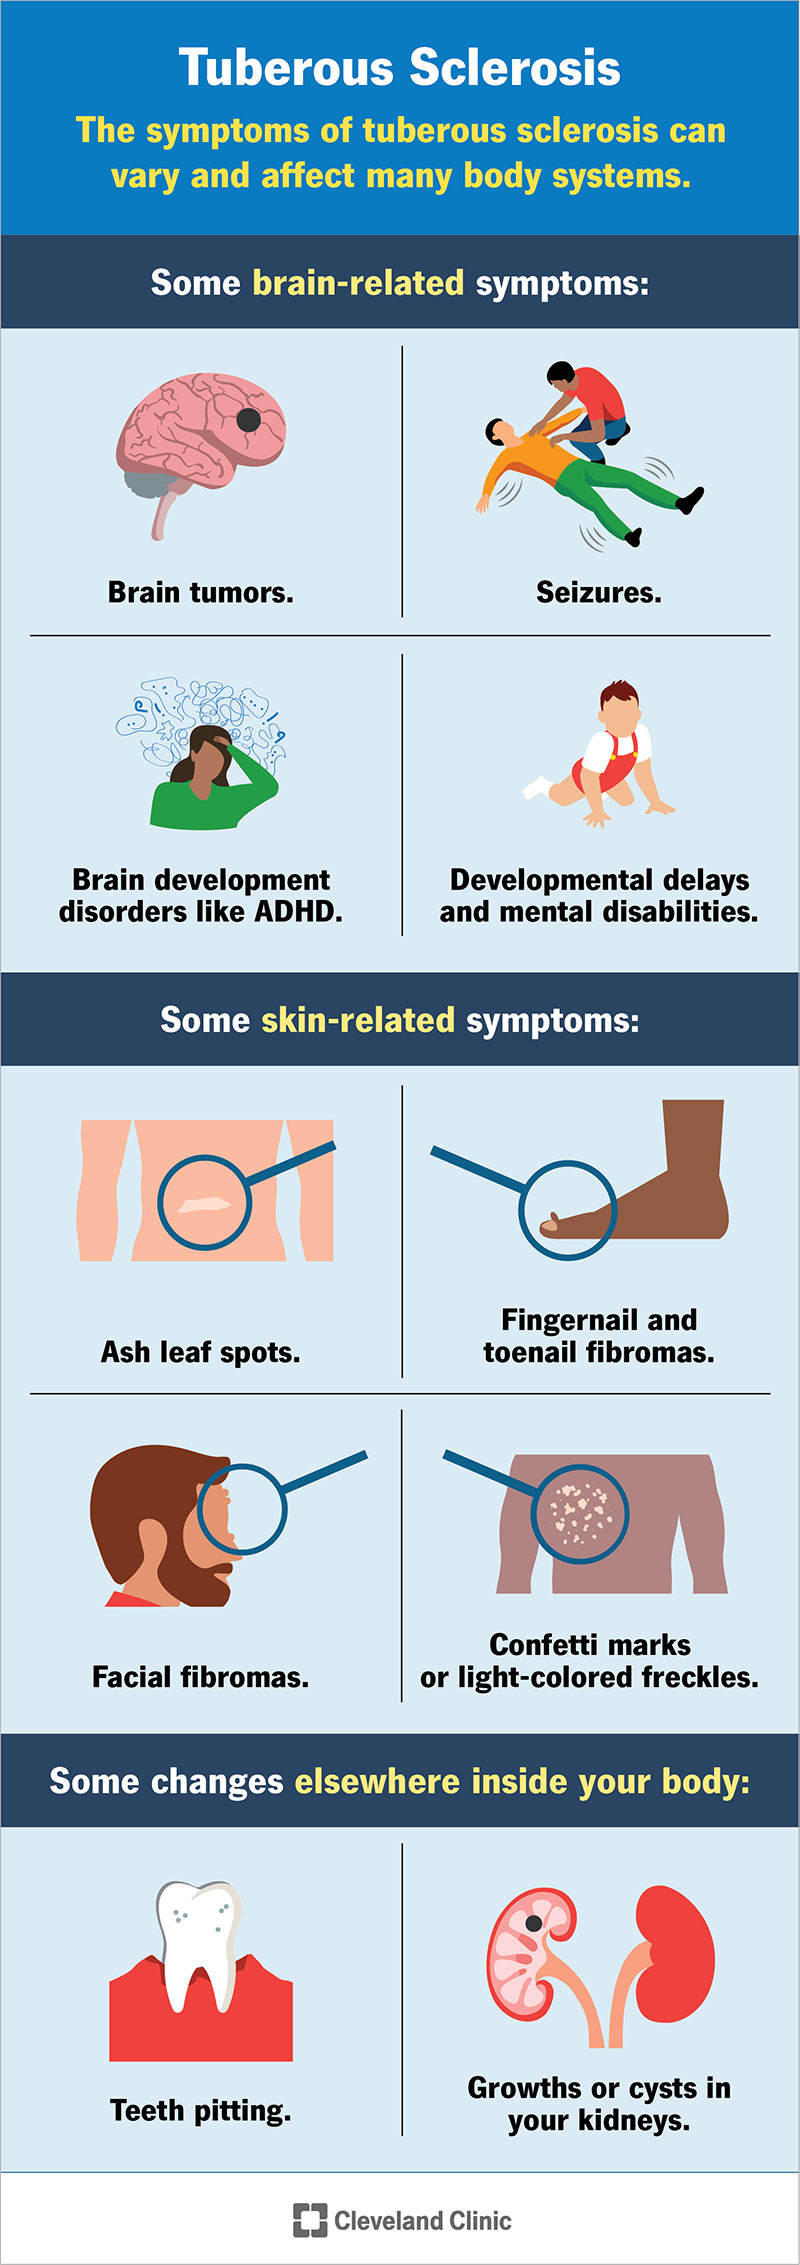 Tuberous sclerosis causes cells to grow out of control throughout your body, especially in your brain and on your skin.